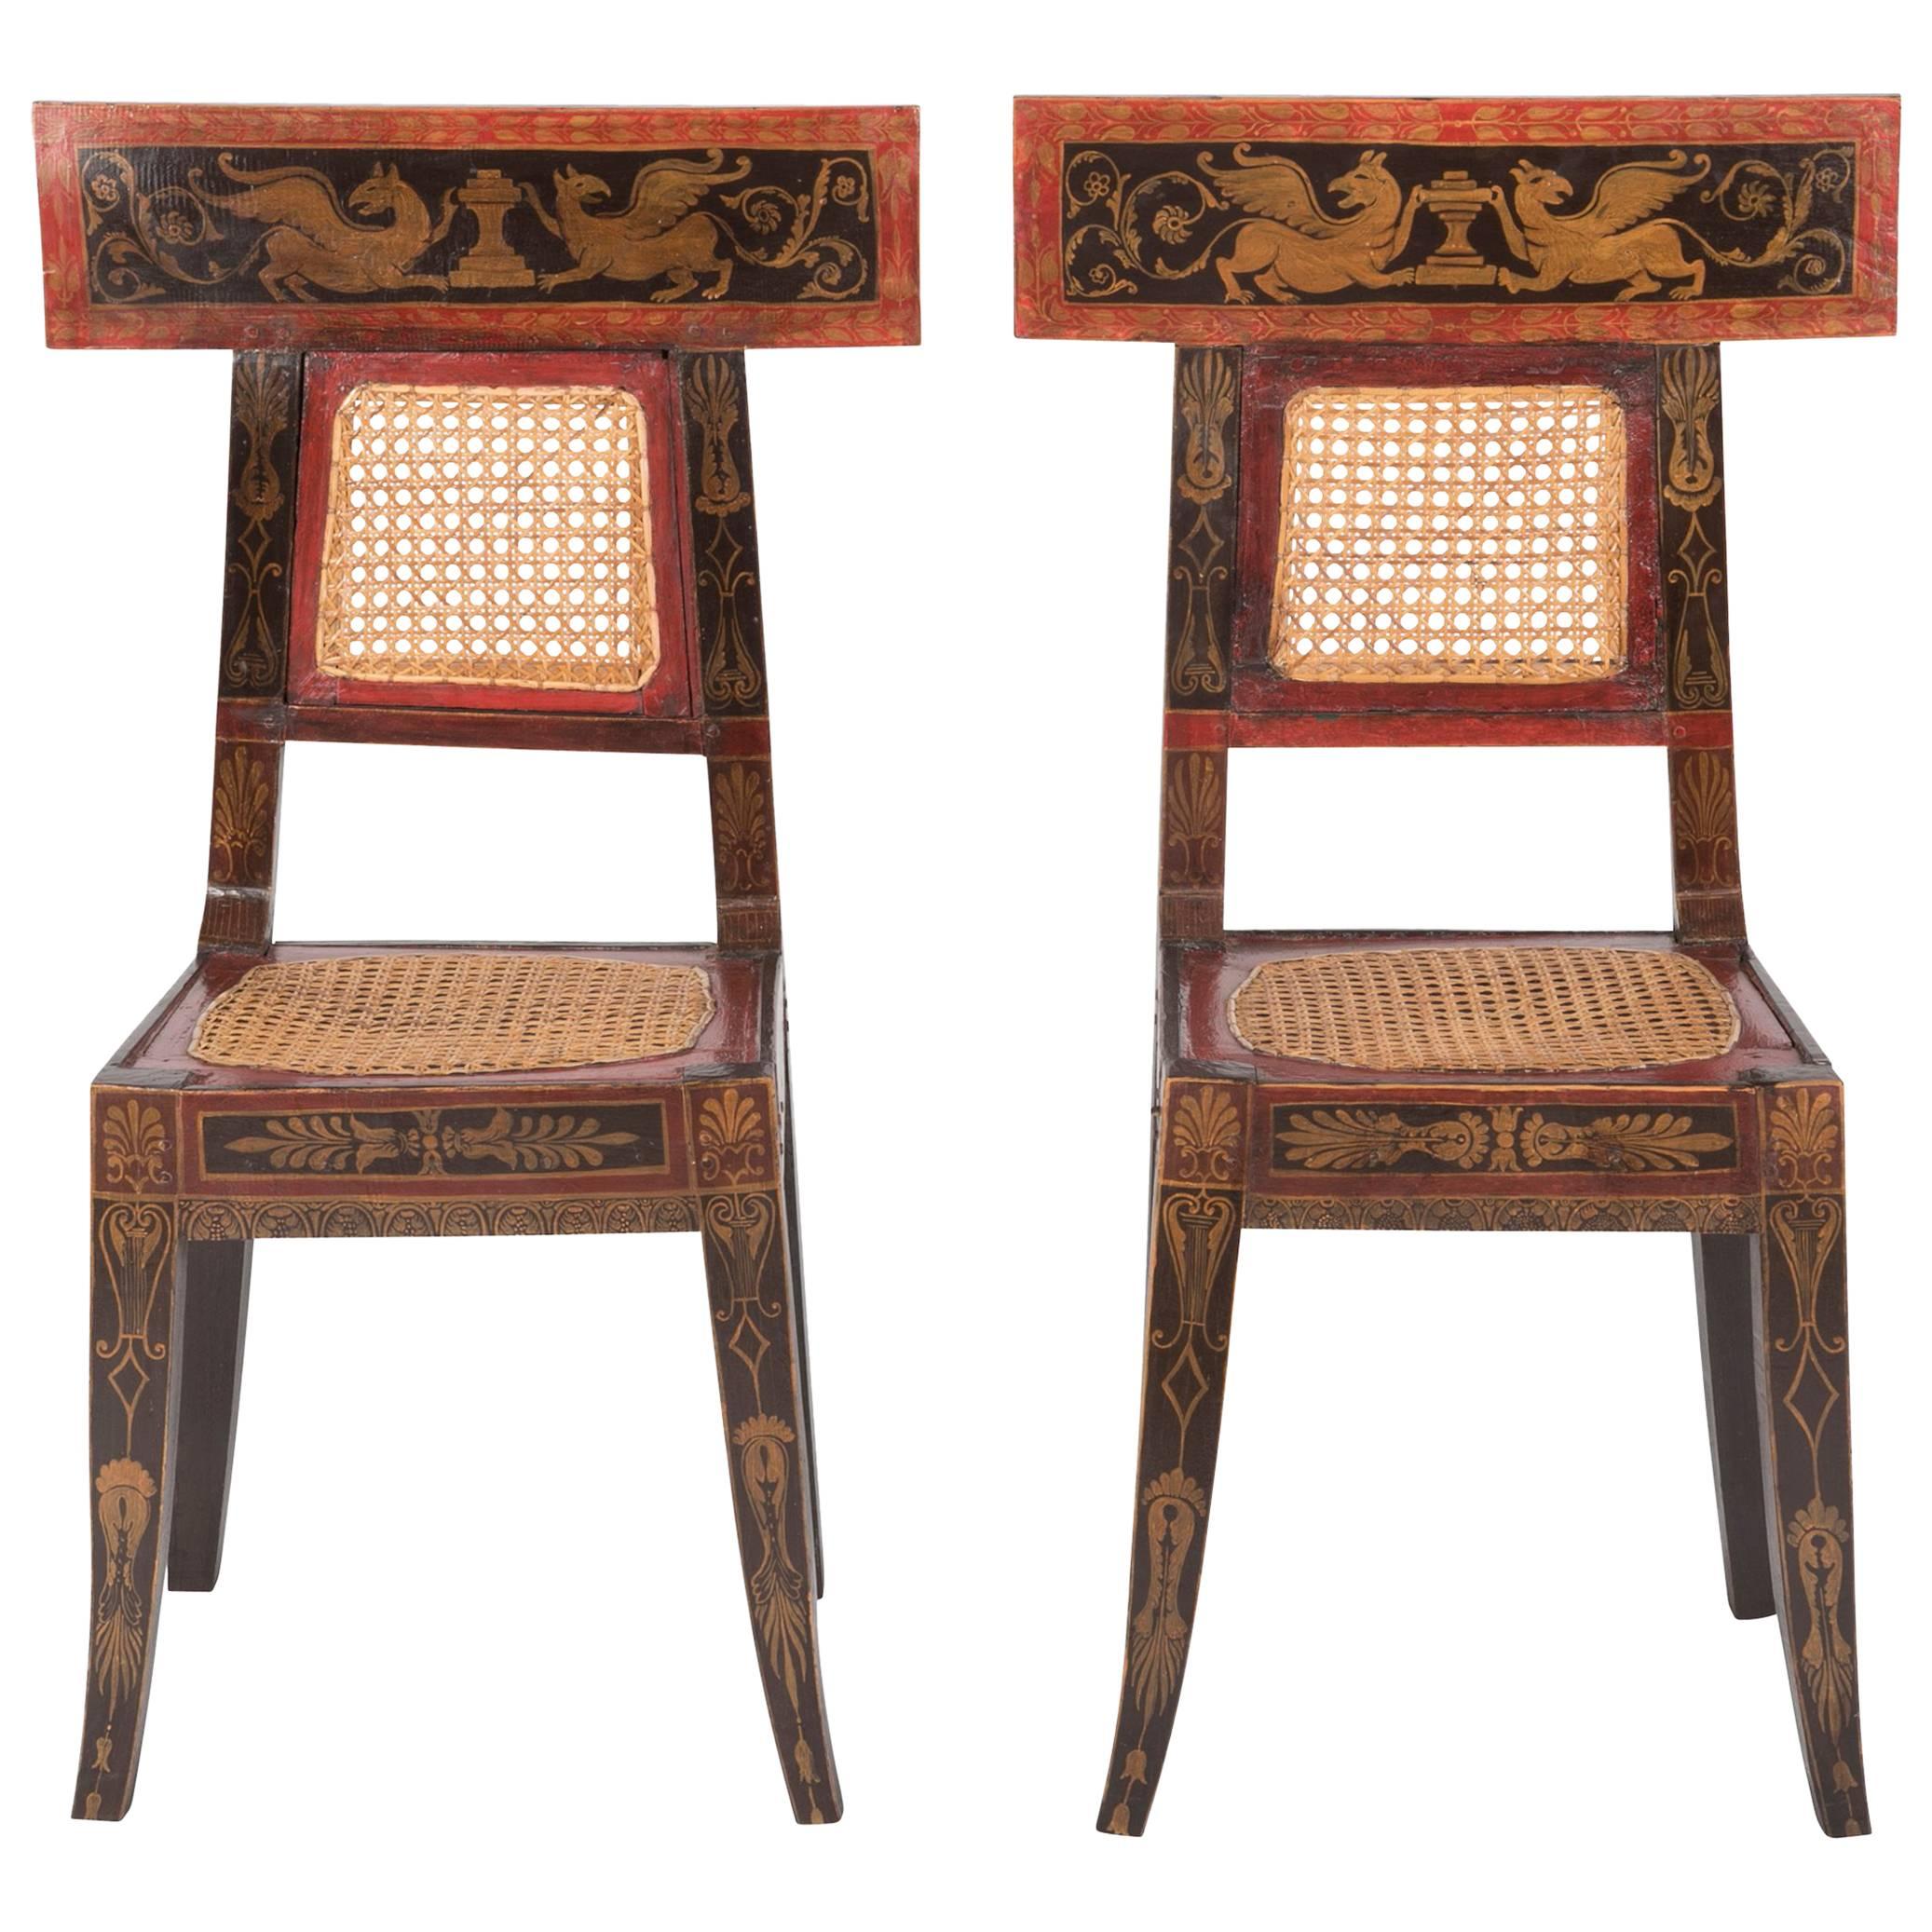 Pair of Caned Painted Side Chairs with Painted Greek Key Freeze